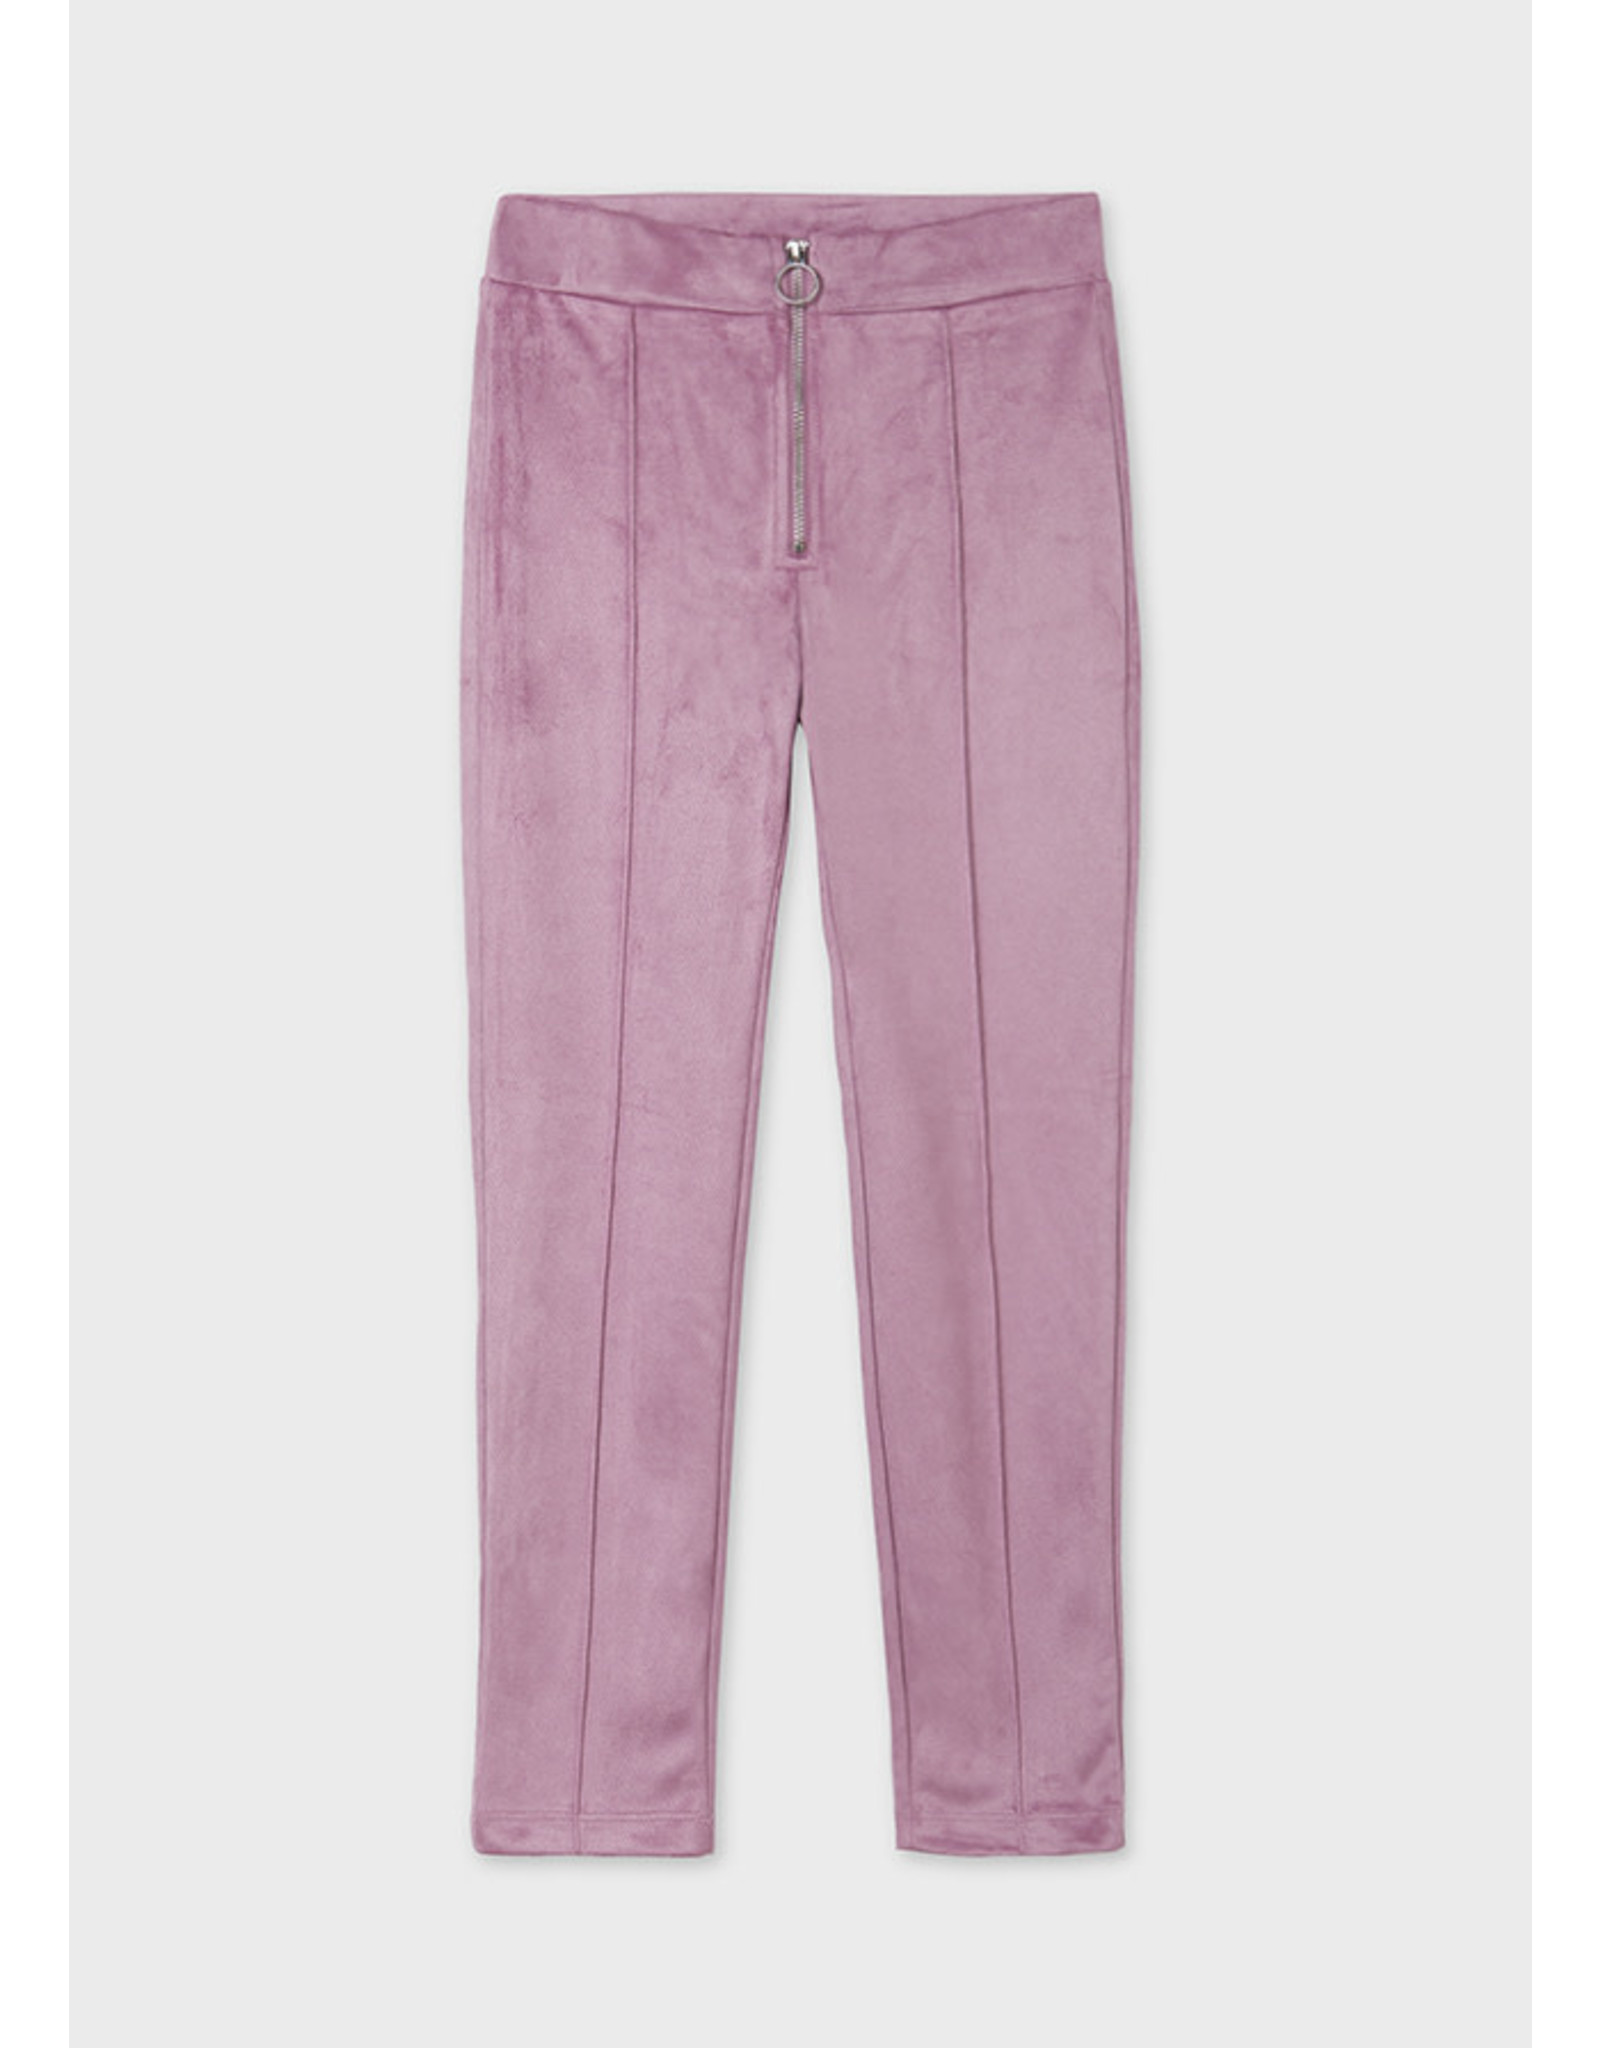 Mayoral Orchid Suede Long Pants